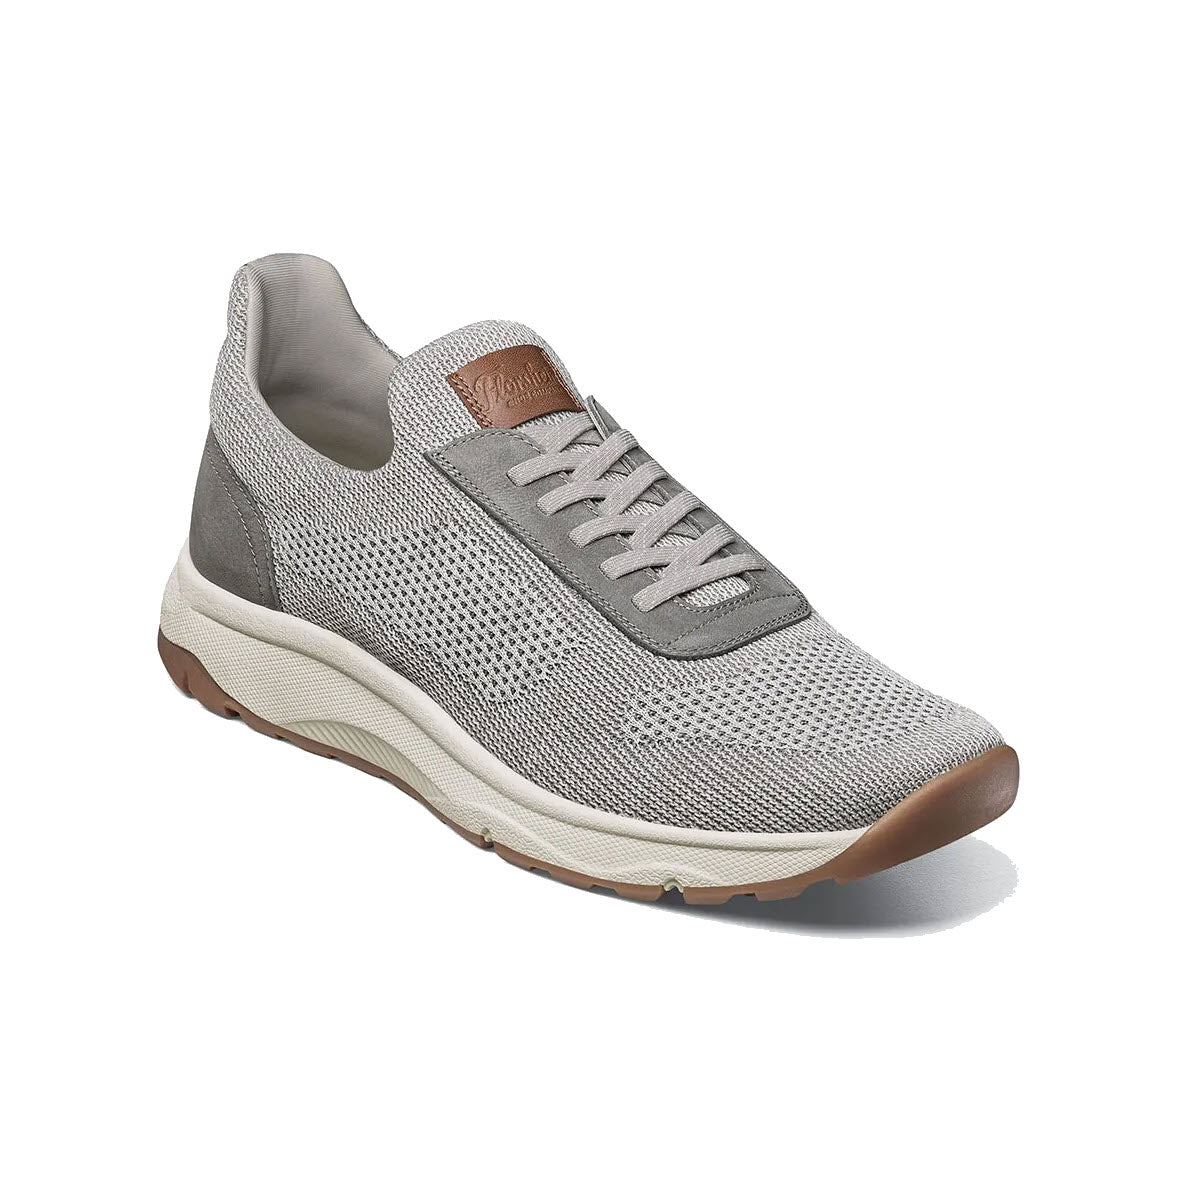 Florsheim dress sneaker with laces, featuring a breathable mesh upper and a contrasting tan leather heel patch on a white sole.